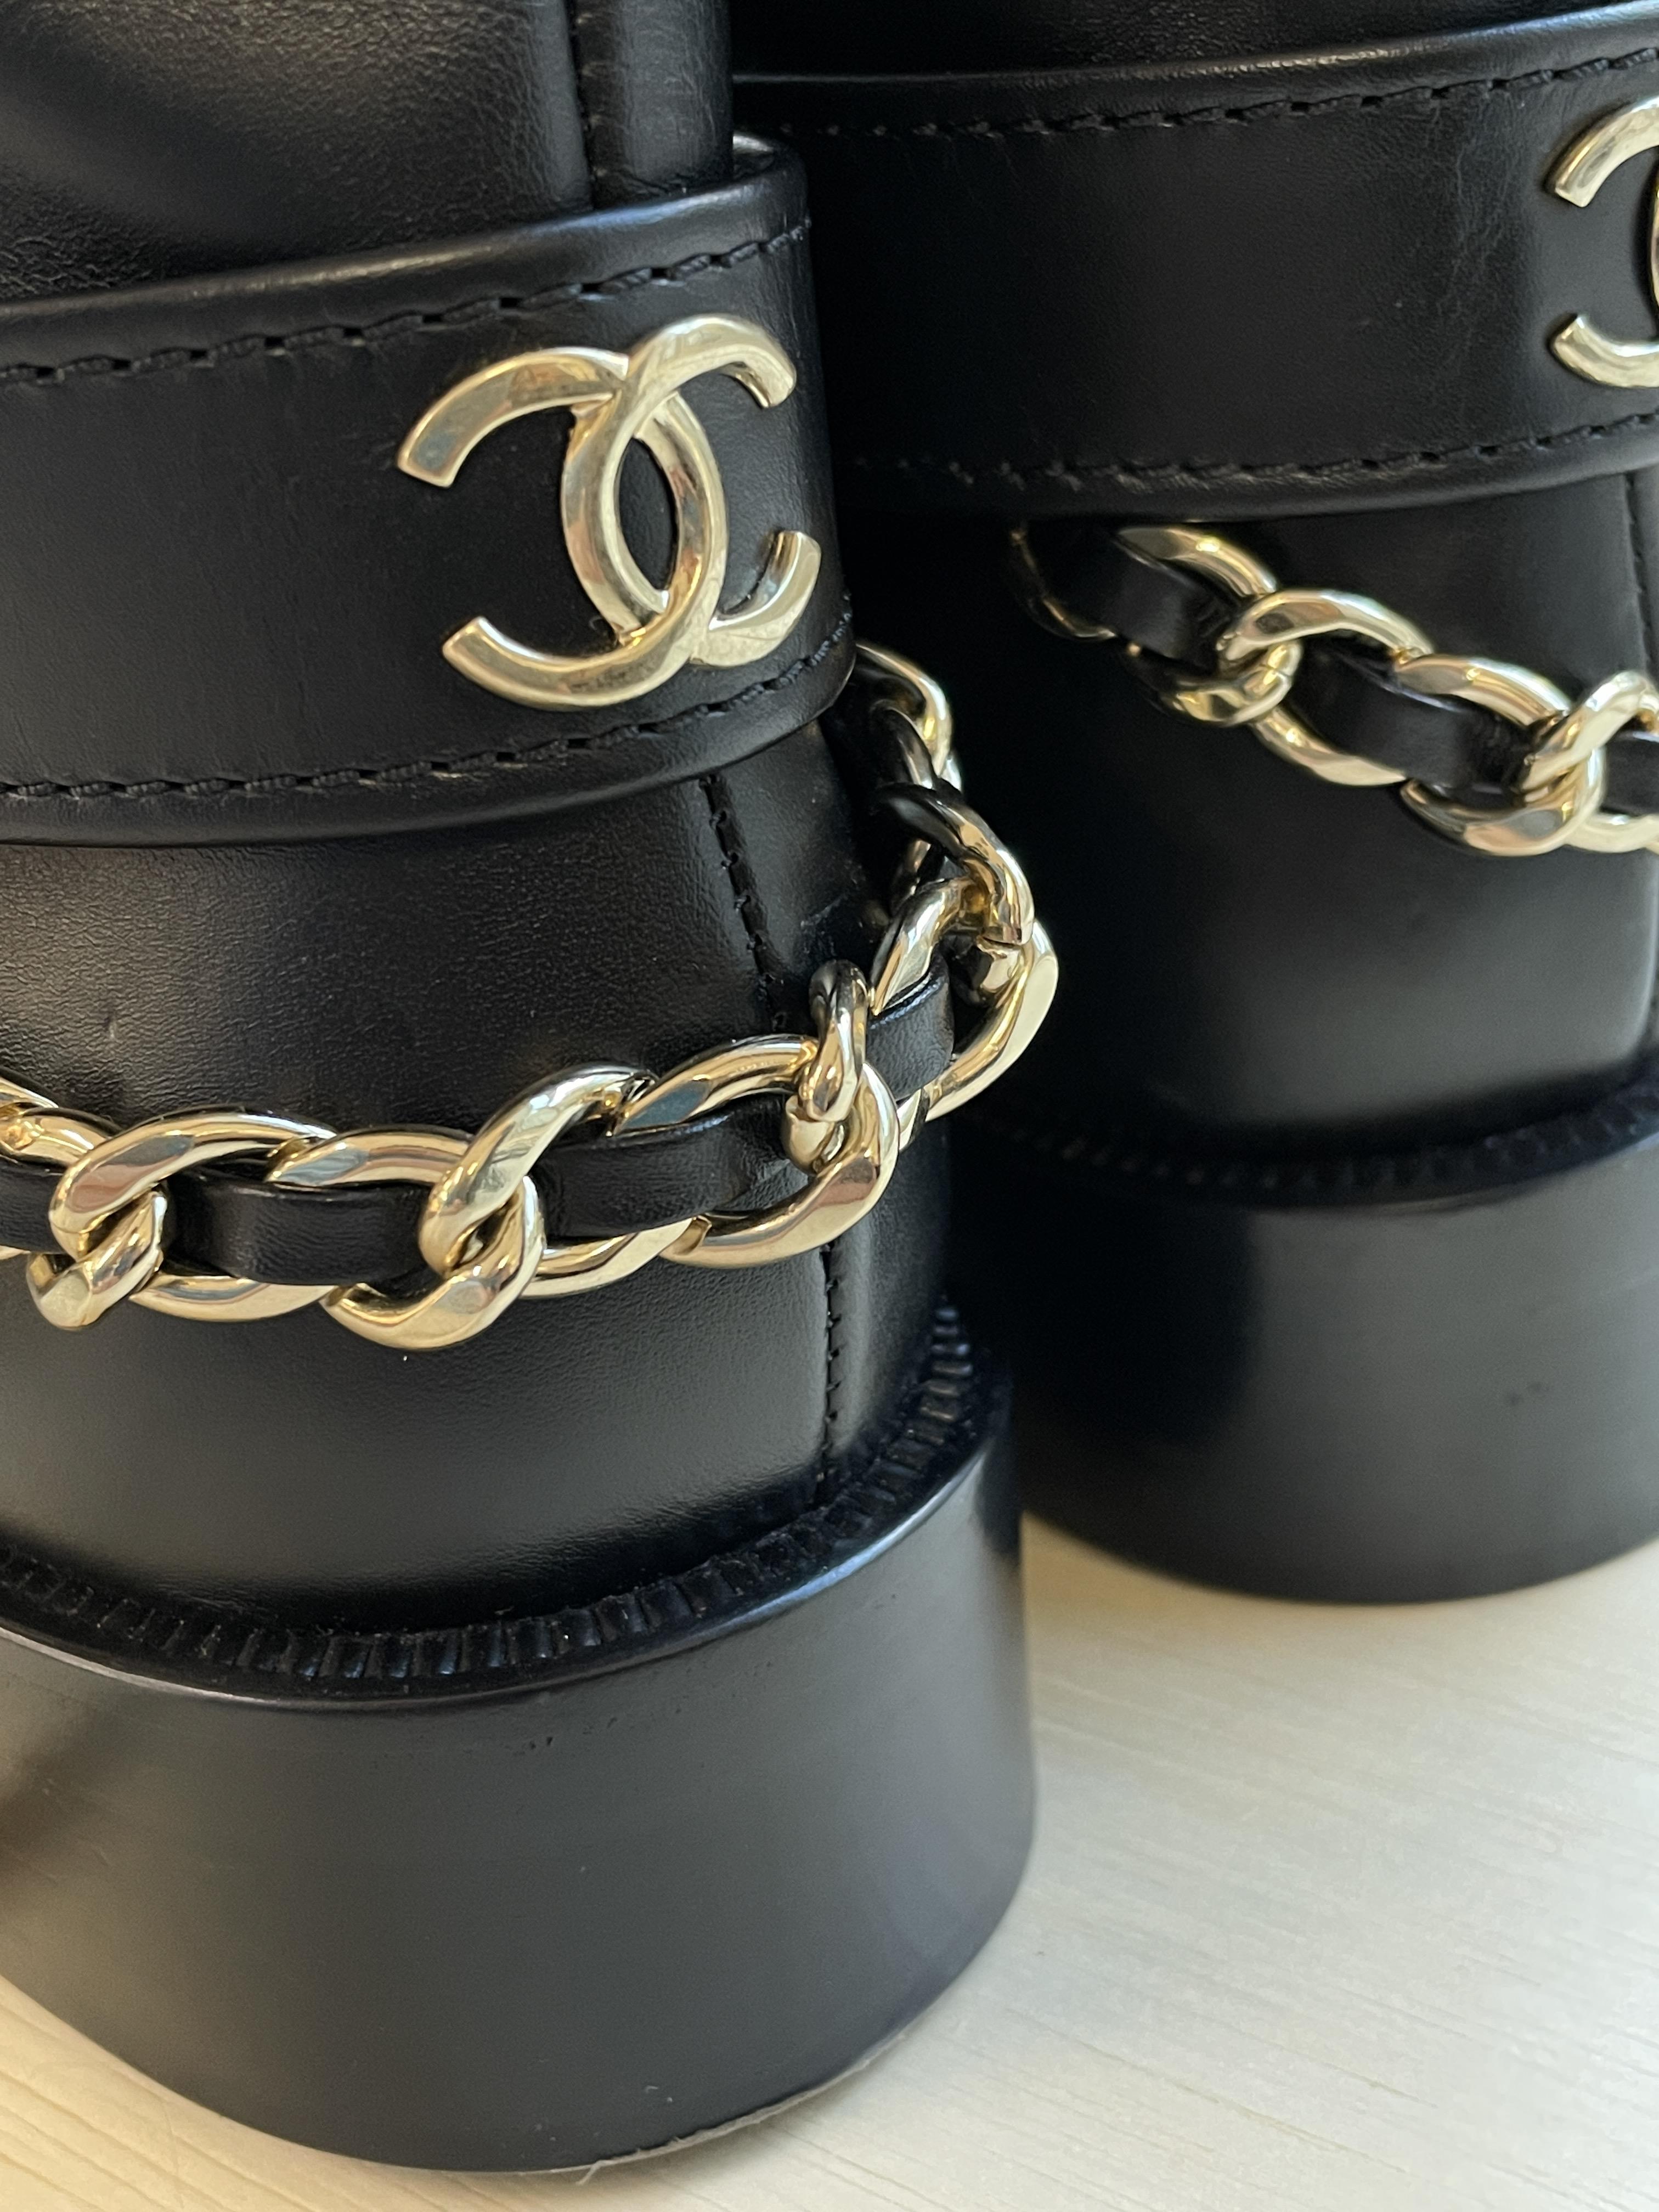 A PAIR OF CHANEL LEATHER ANKLE MOTO BOOTS - Image 6 of 12